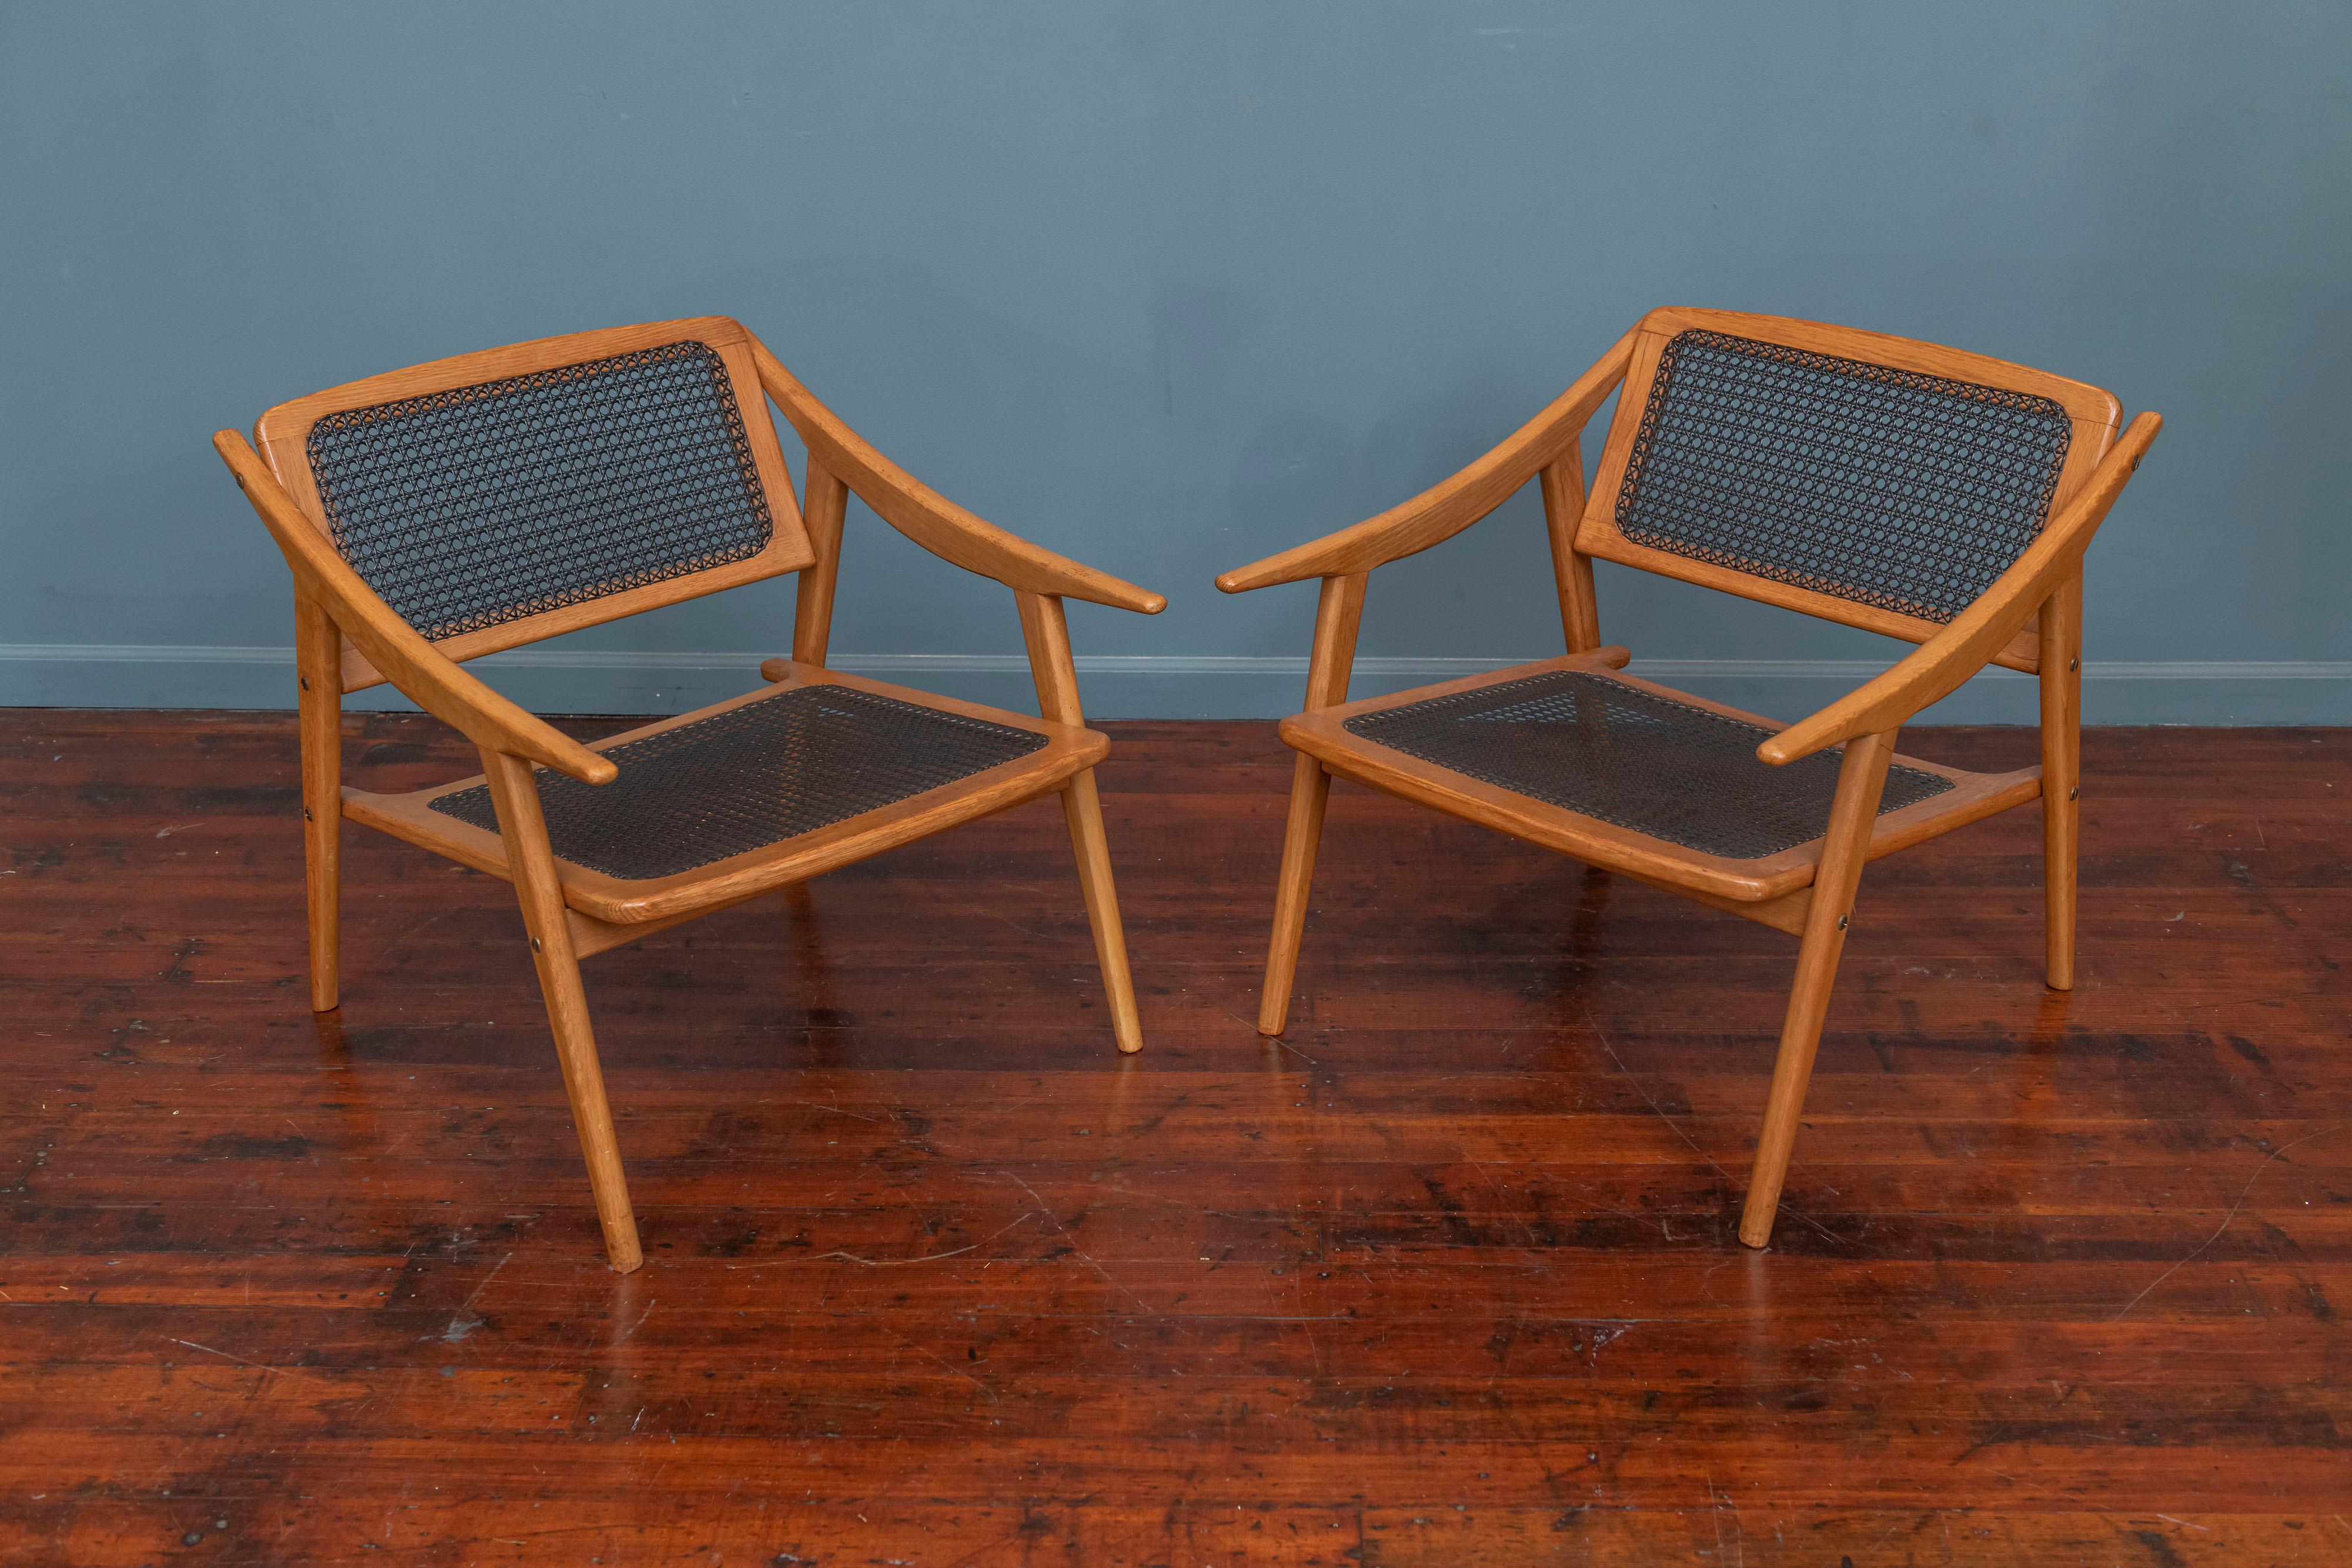 Exceptional pair of cane and oak lounge chairs by French architect and designer, Andre Baudoin. France, 1950. 
Provenance: Commissioned for a property in Le Havre, France decorated by Andre Baudoin in the 1950s.